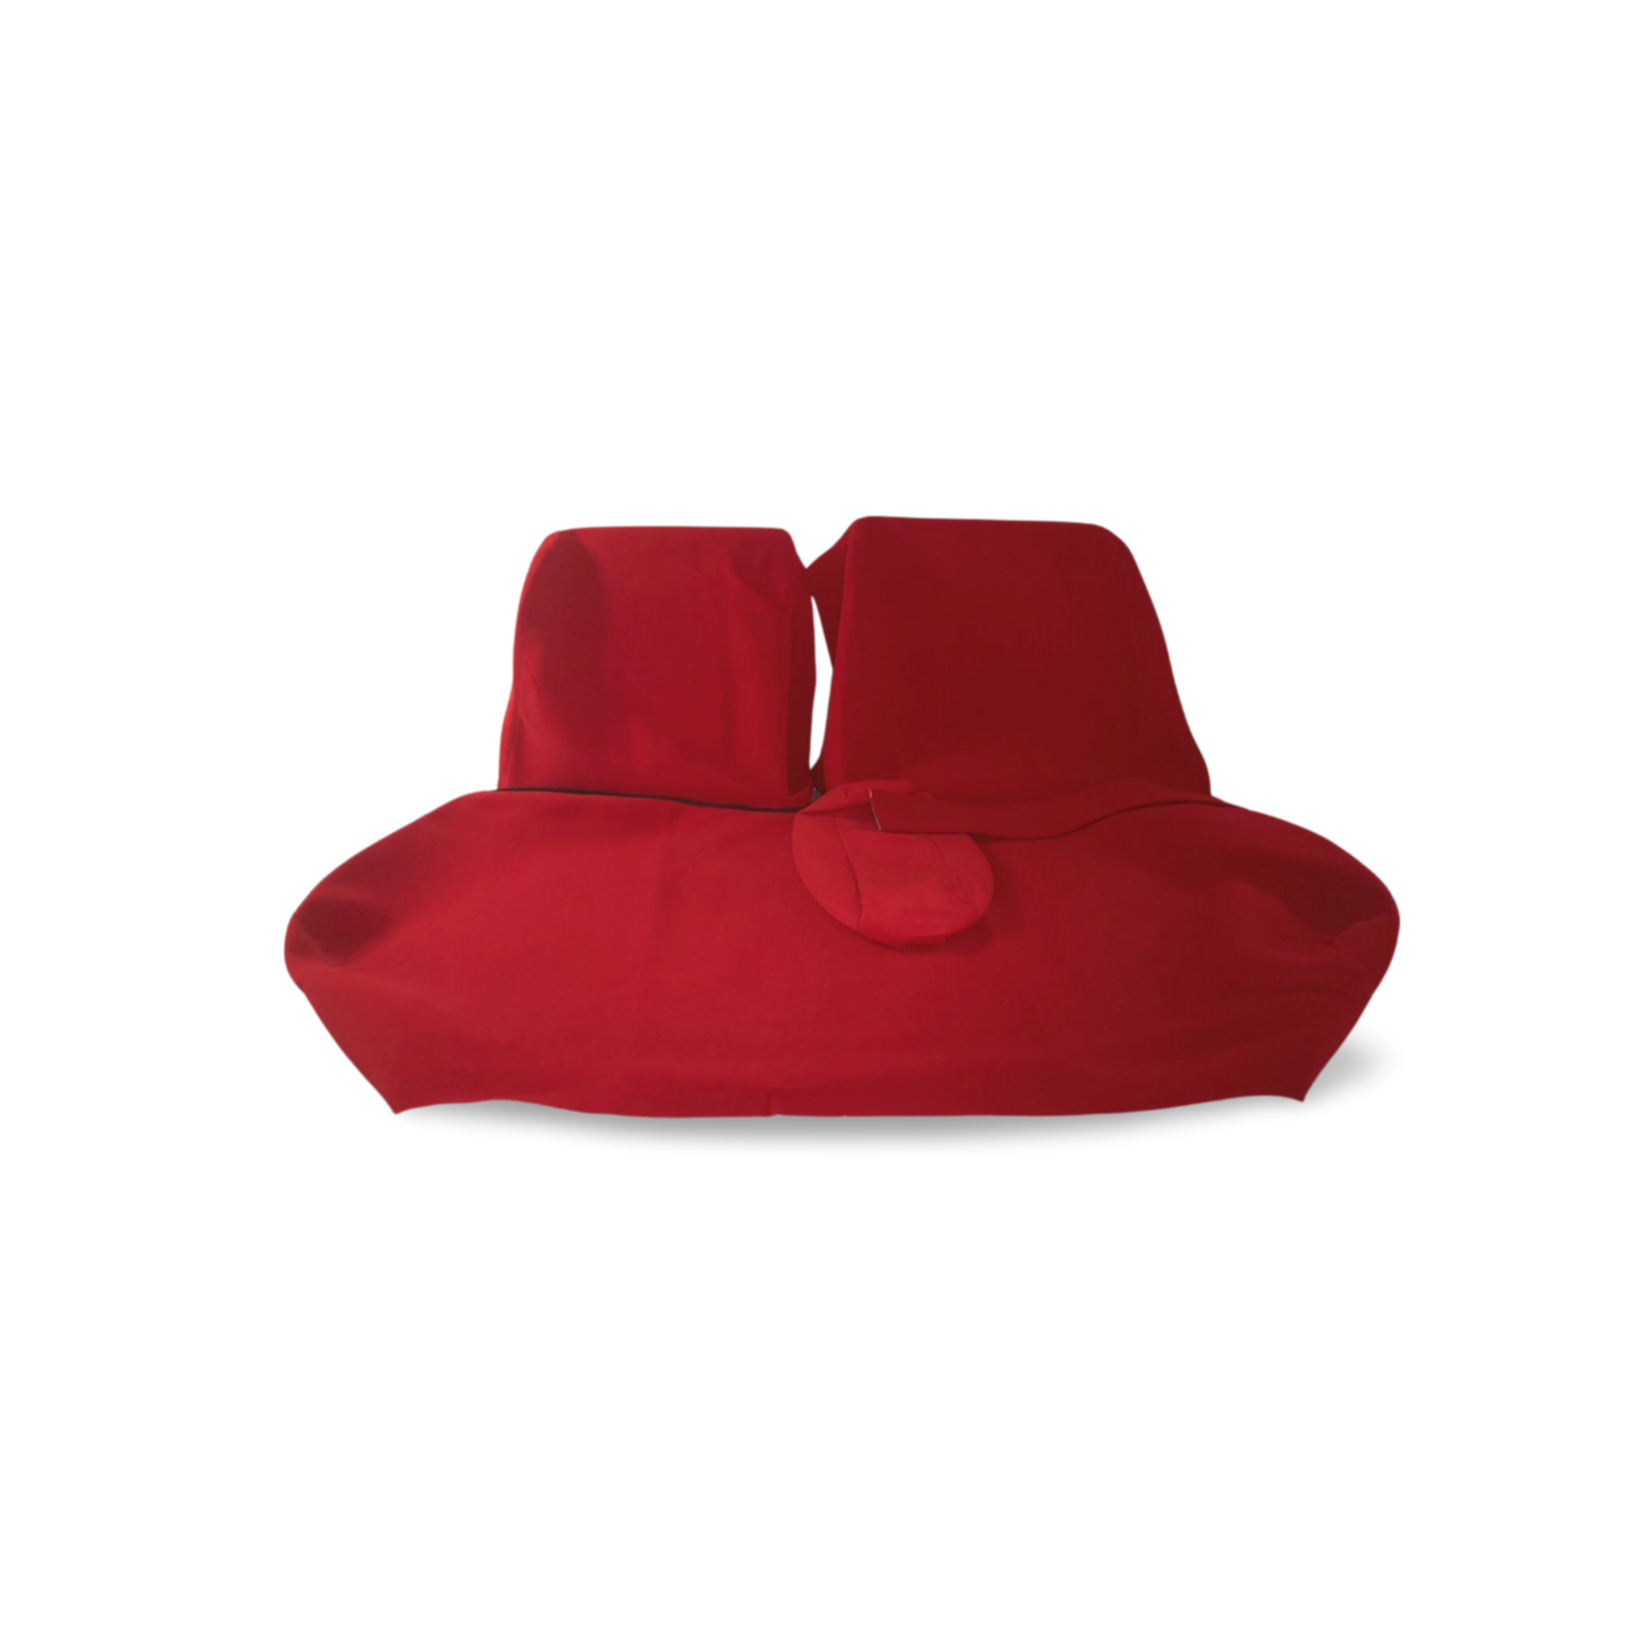 Upholstery set Jersey red 16/74 (with armrest bench 20cm) non Pallas -07/62 Nr Org: Interior - Image 16/74